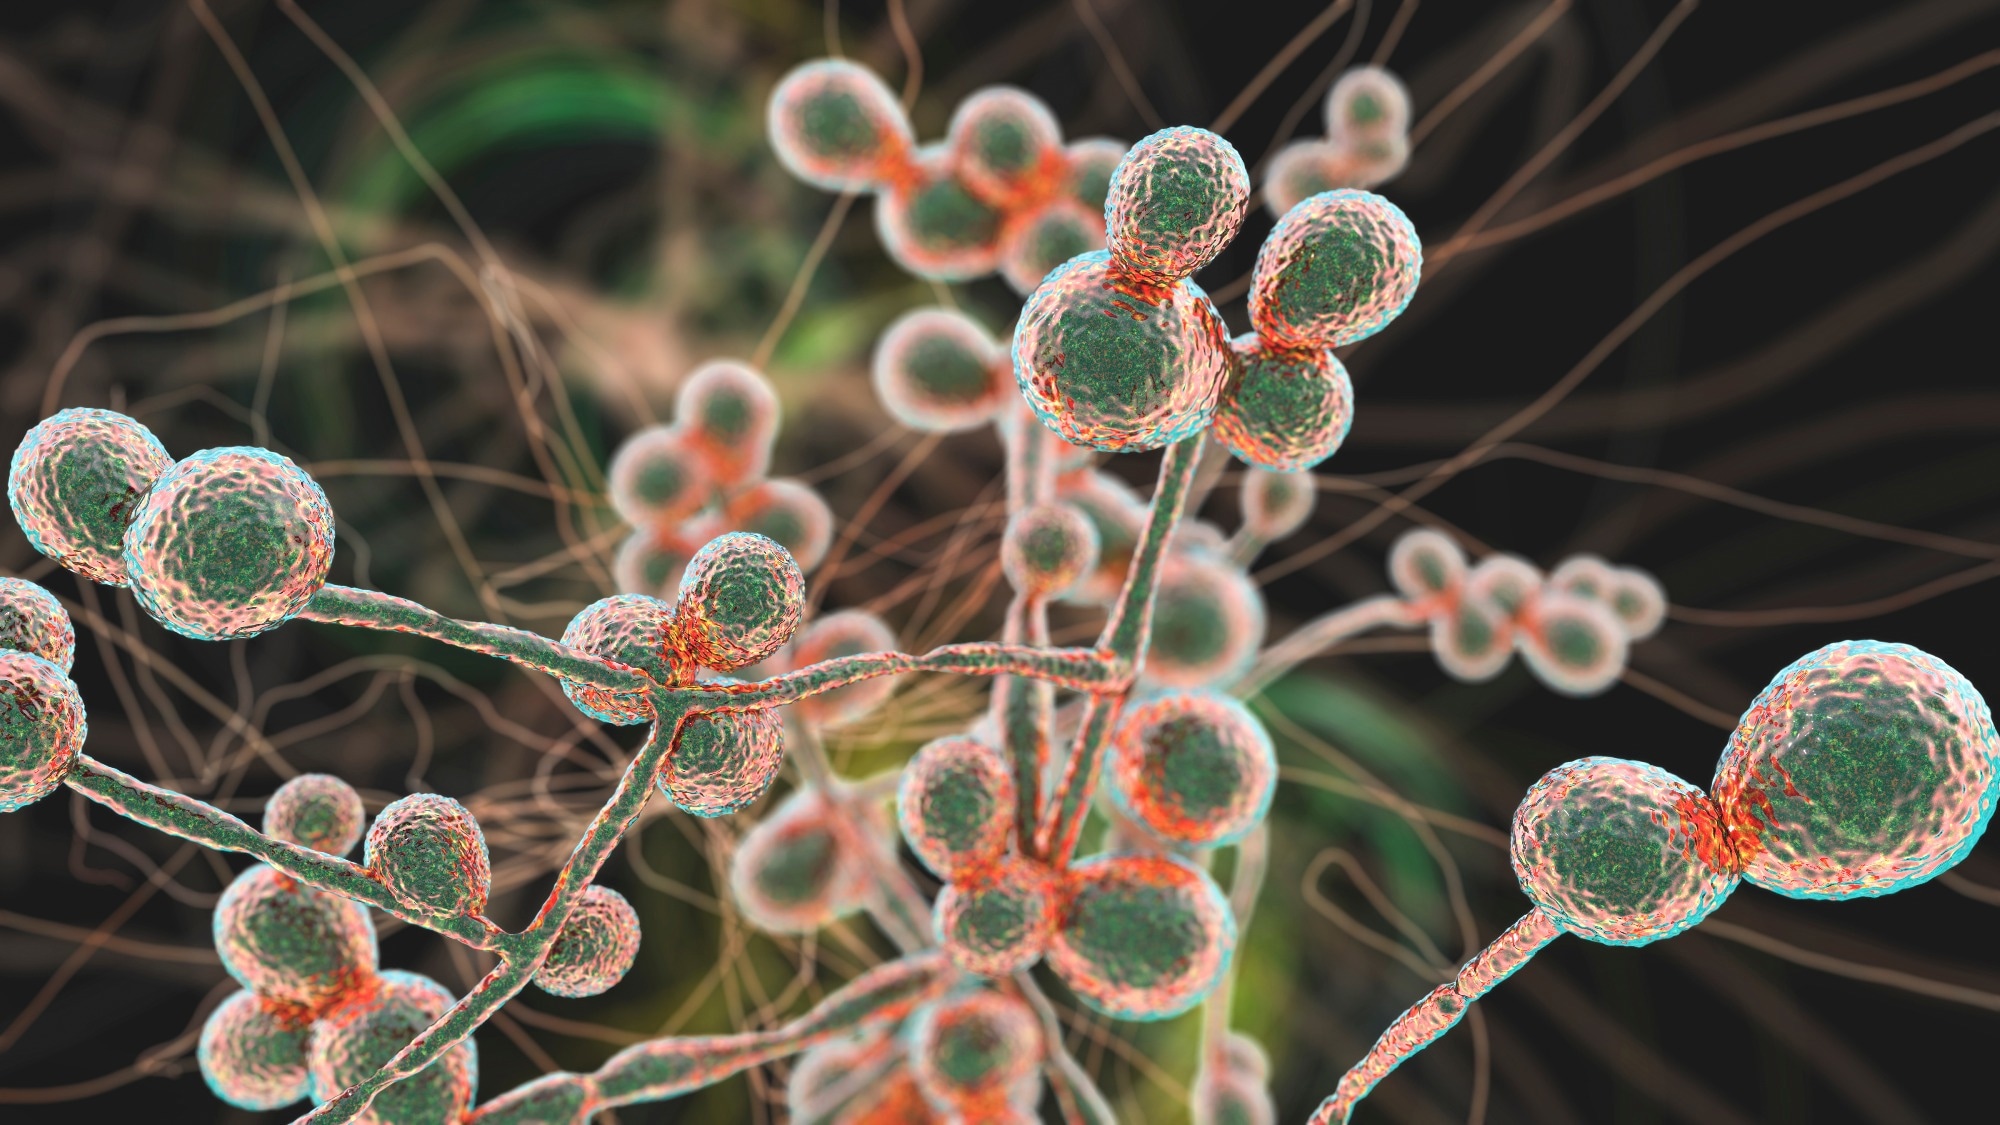 Study: Selection of cross-reactive T cells by commensal and food-derived yeasts drives cytotoxic TH1 cell responses in Crohn’s disease. Image Credit: Kateryna Kon / Shutterstock.com